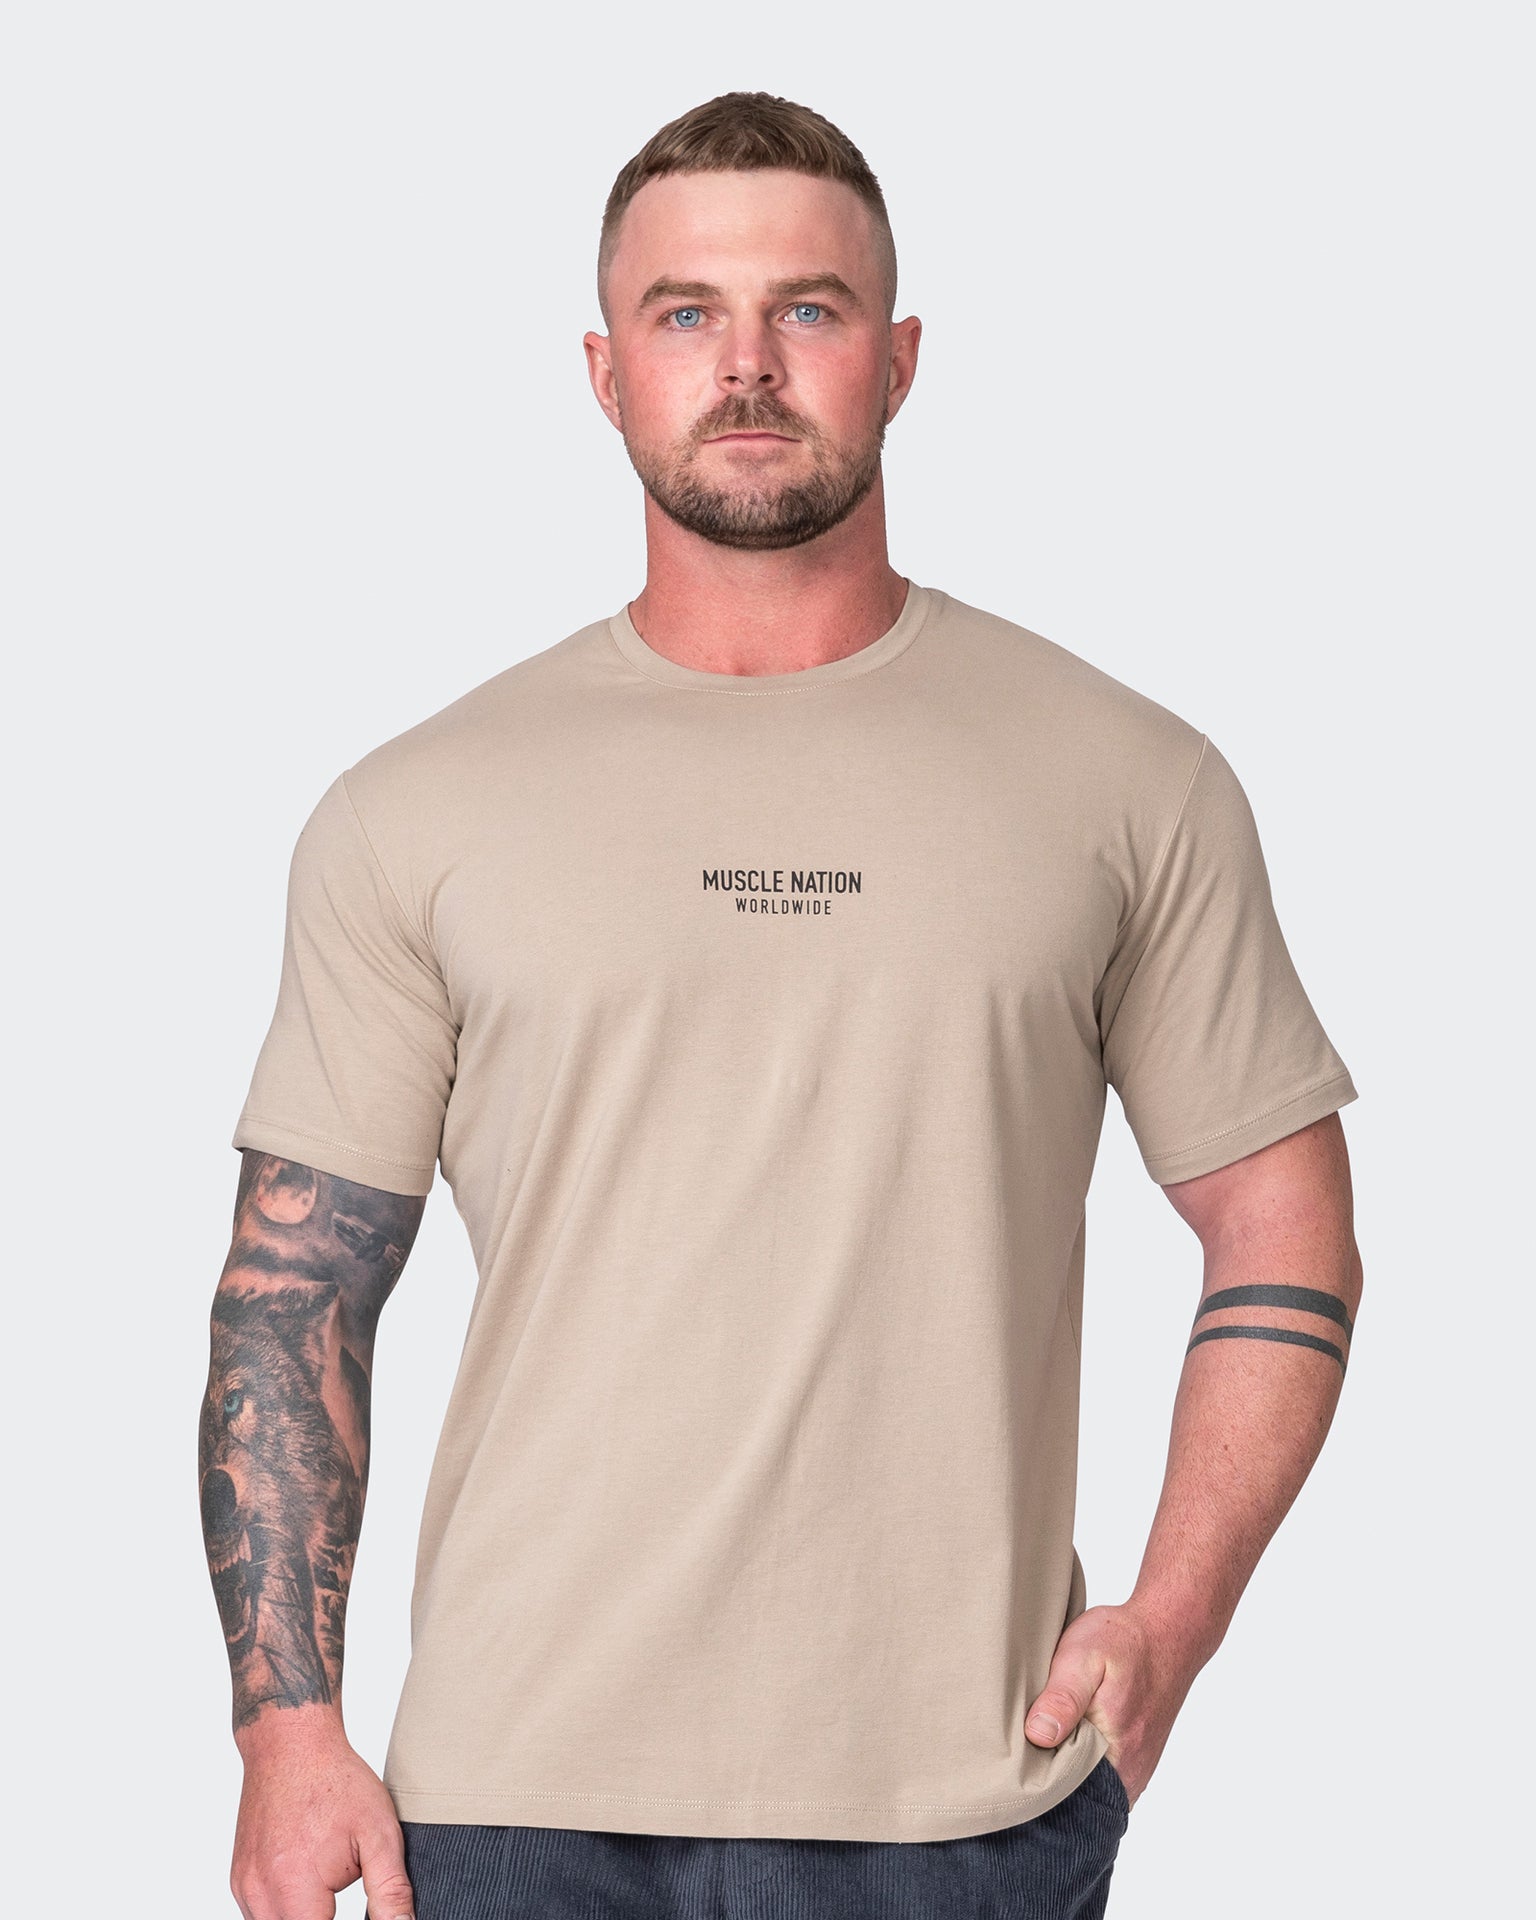 Muscle Nation T-Shirts Worldwide Condition Tee - Fossil